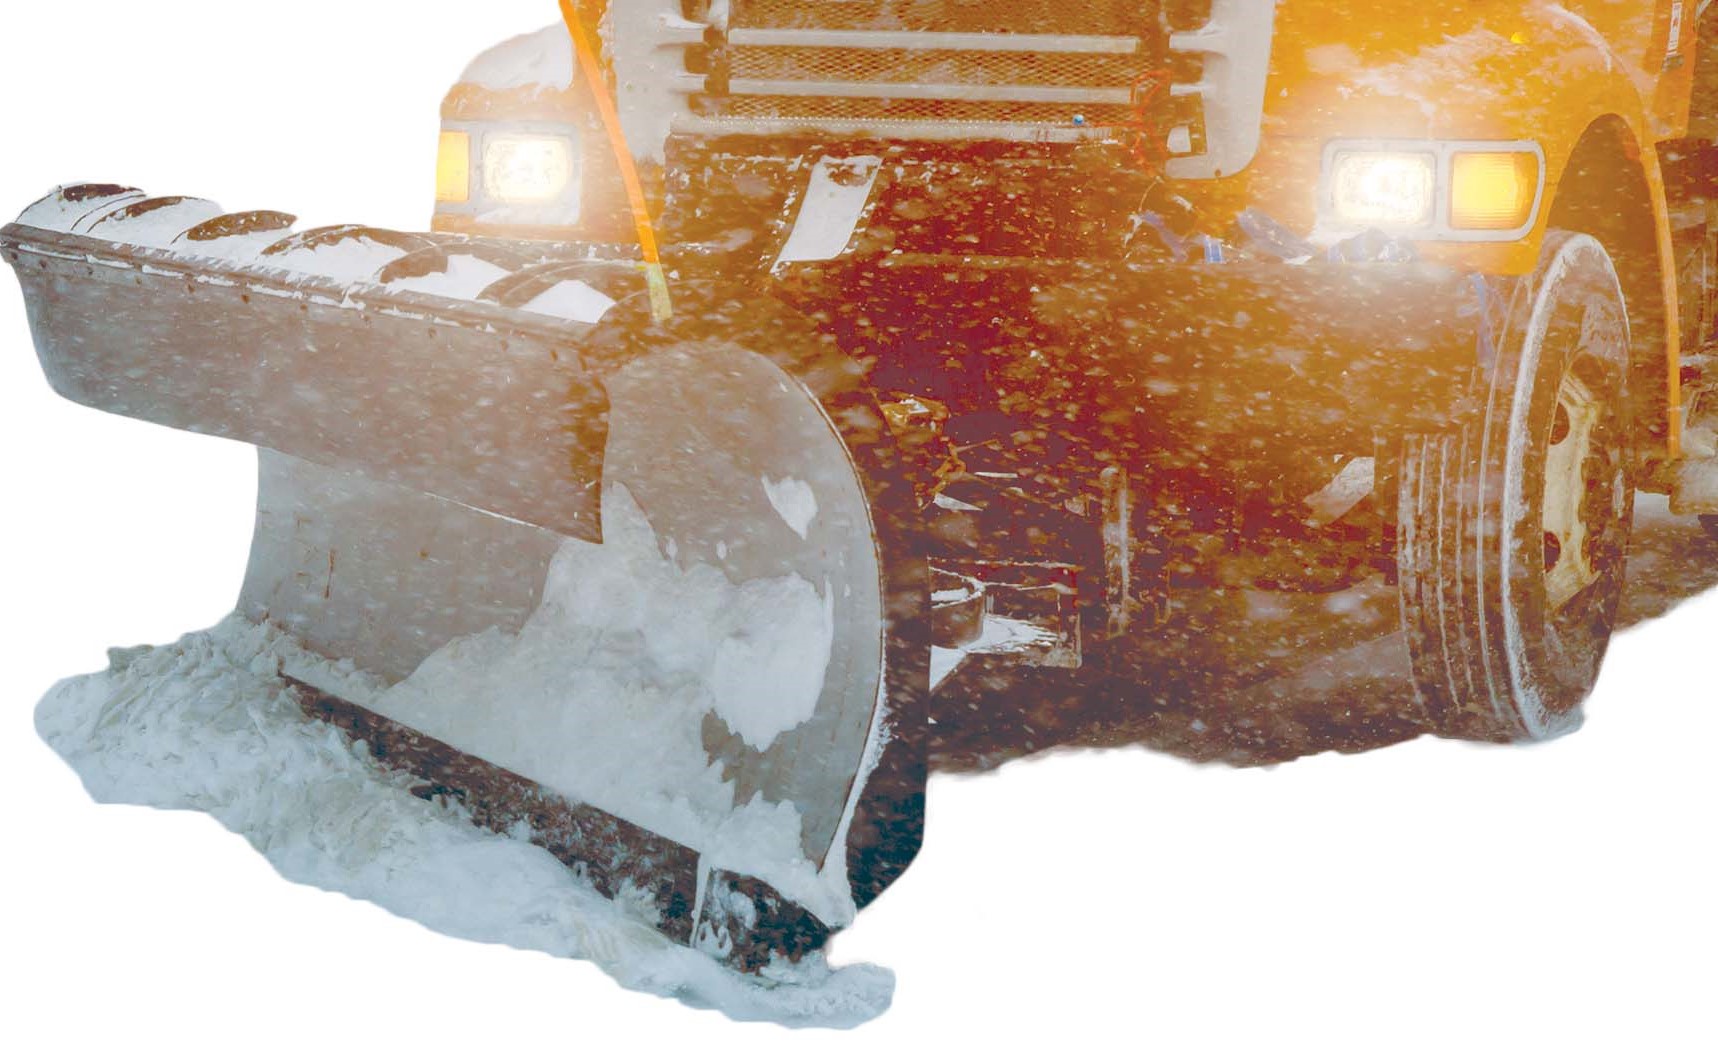 Cutout image of a snow plow moving snow with lights on.